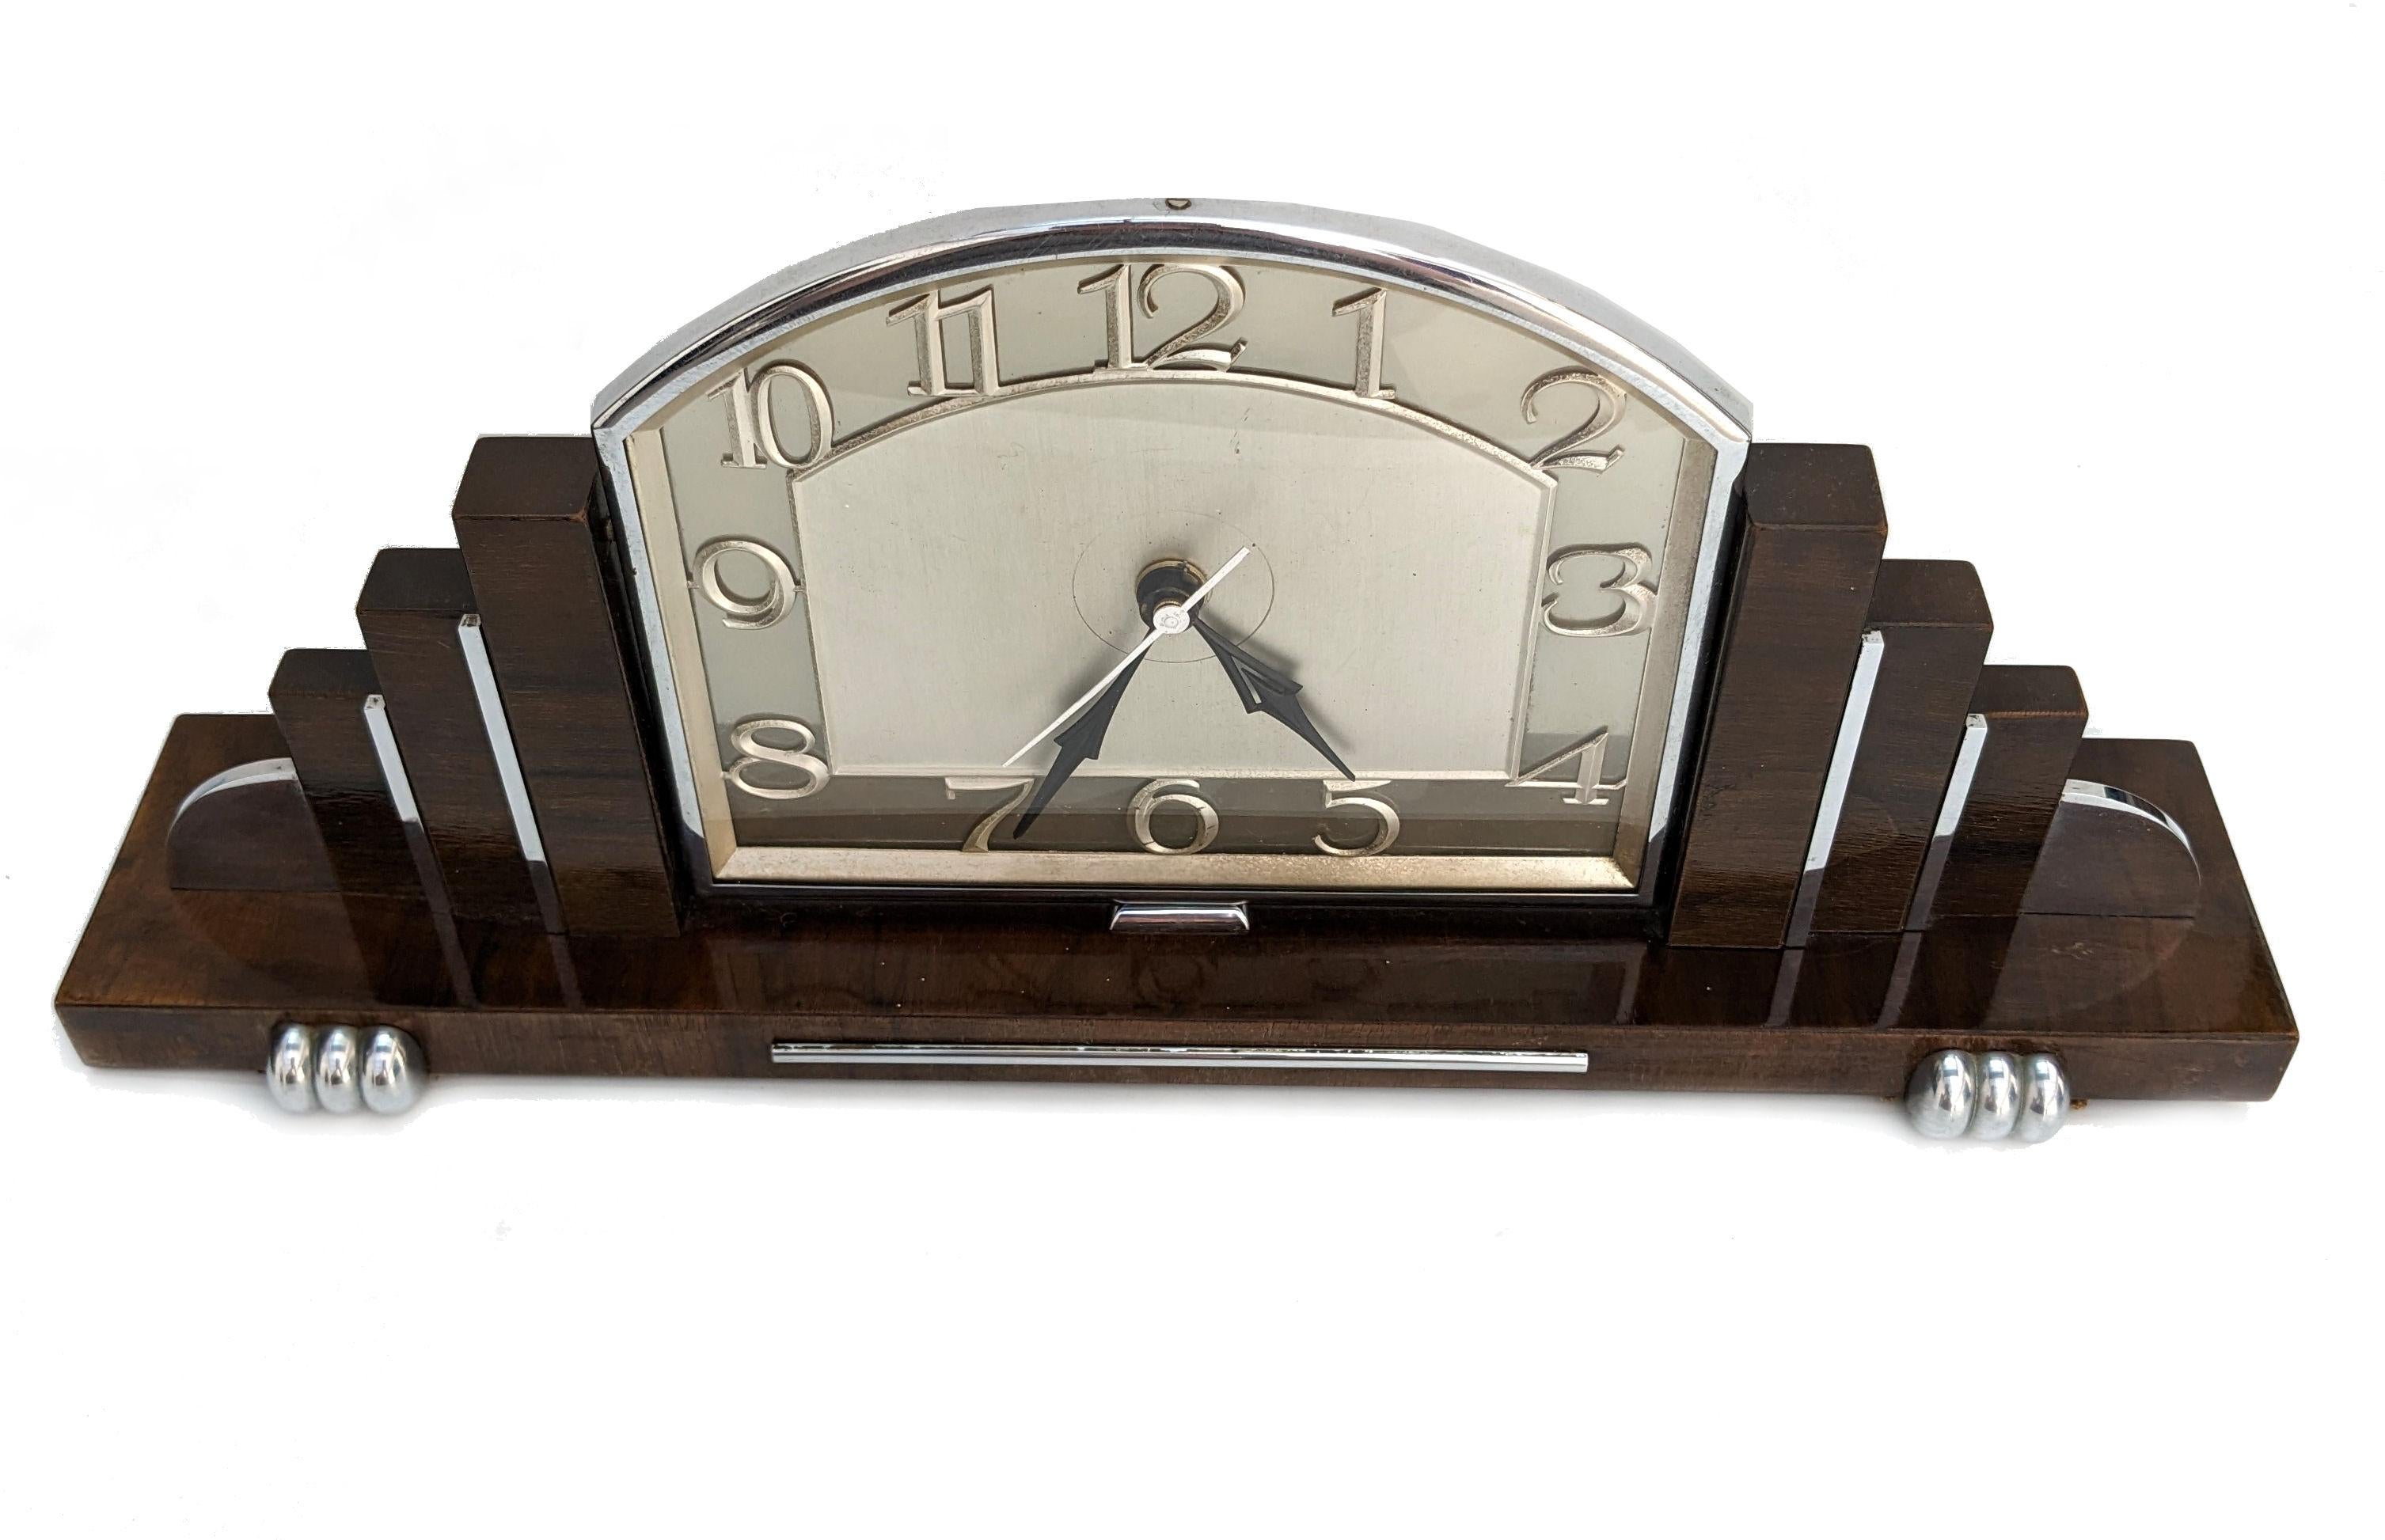 For your consideration is this very stylish 1930s Art Deco mantle clock made in England. Superb skyscraper stepped sides . Made from Walnut with chrome accents really sets this clock off perfectly. The movement which was originally electric which